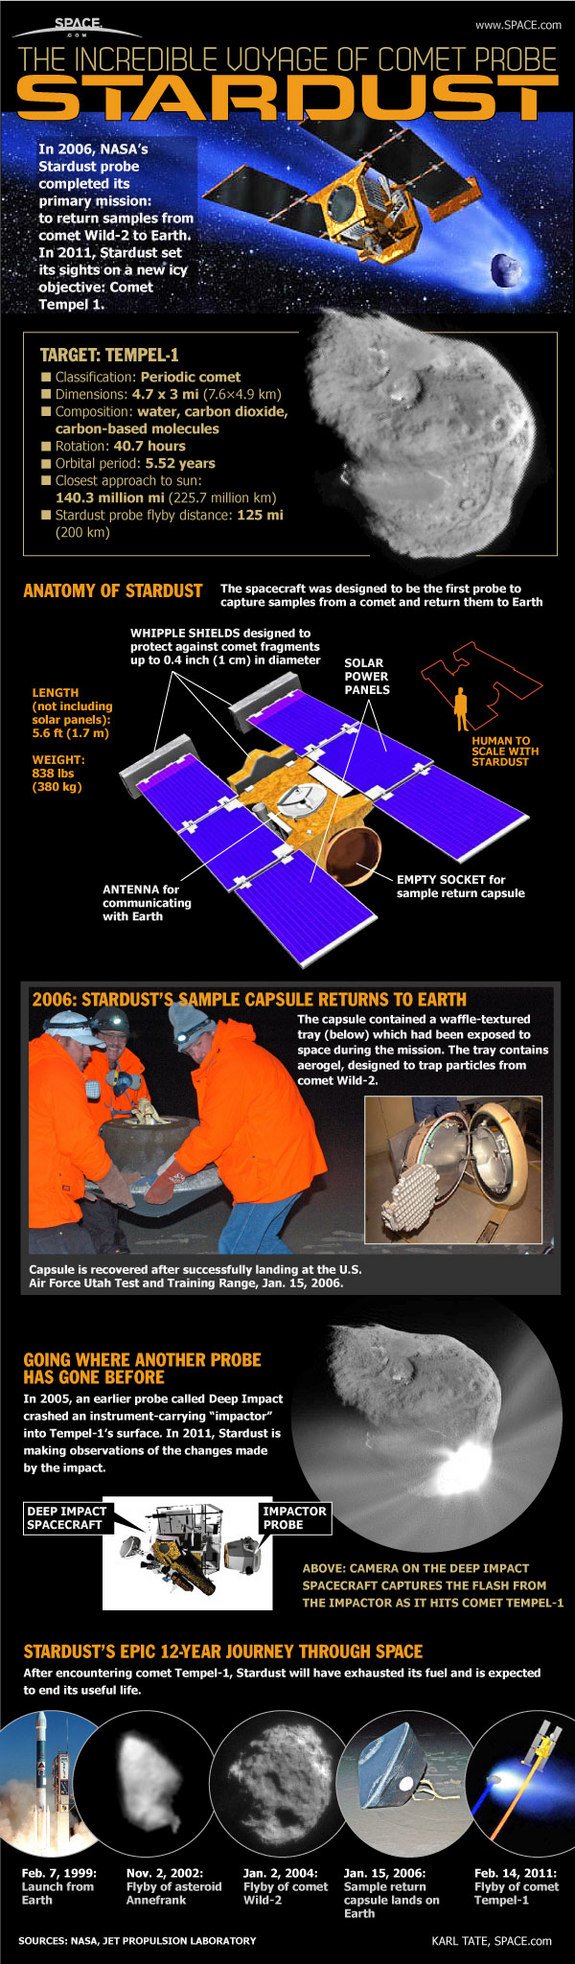 NASA's Stardust probe will visit two comets during its mission. This SPACE.com infographic shows how the spacecraft works.